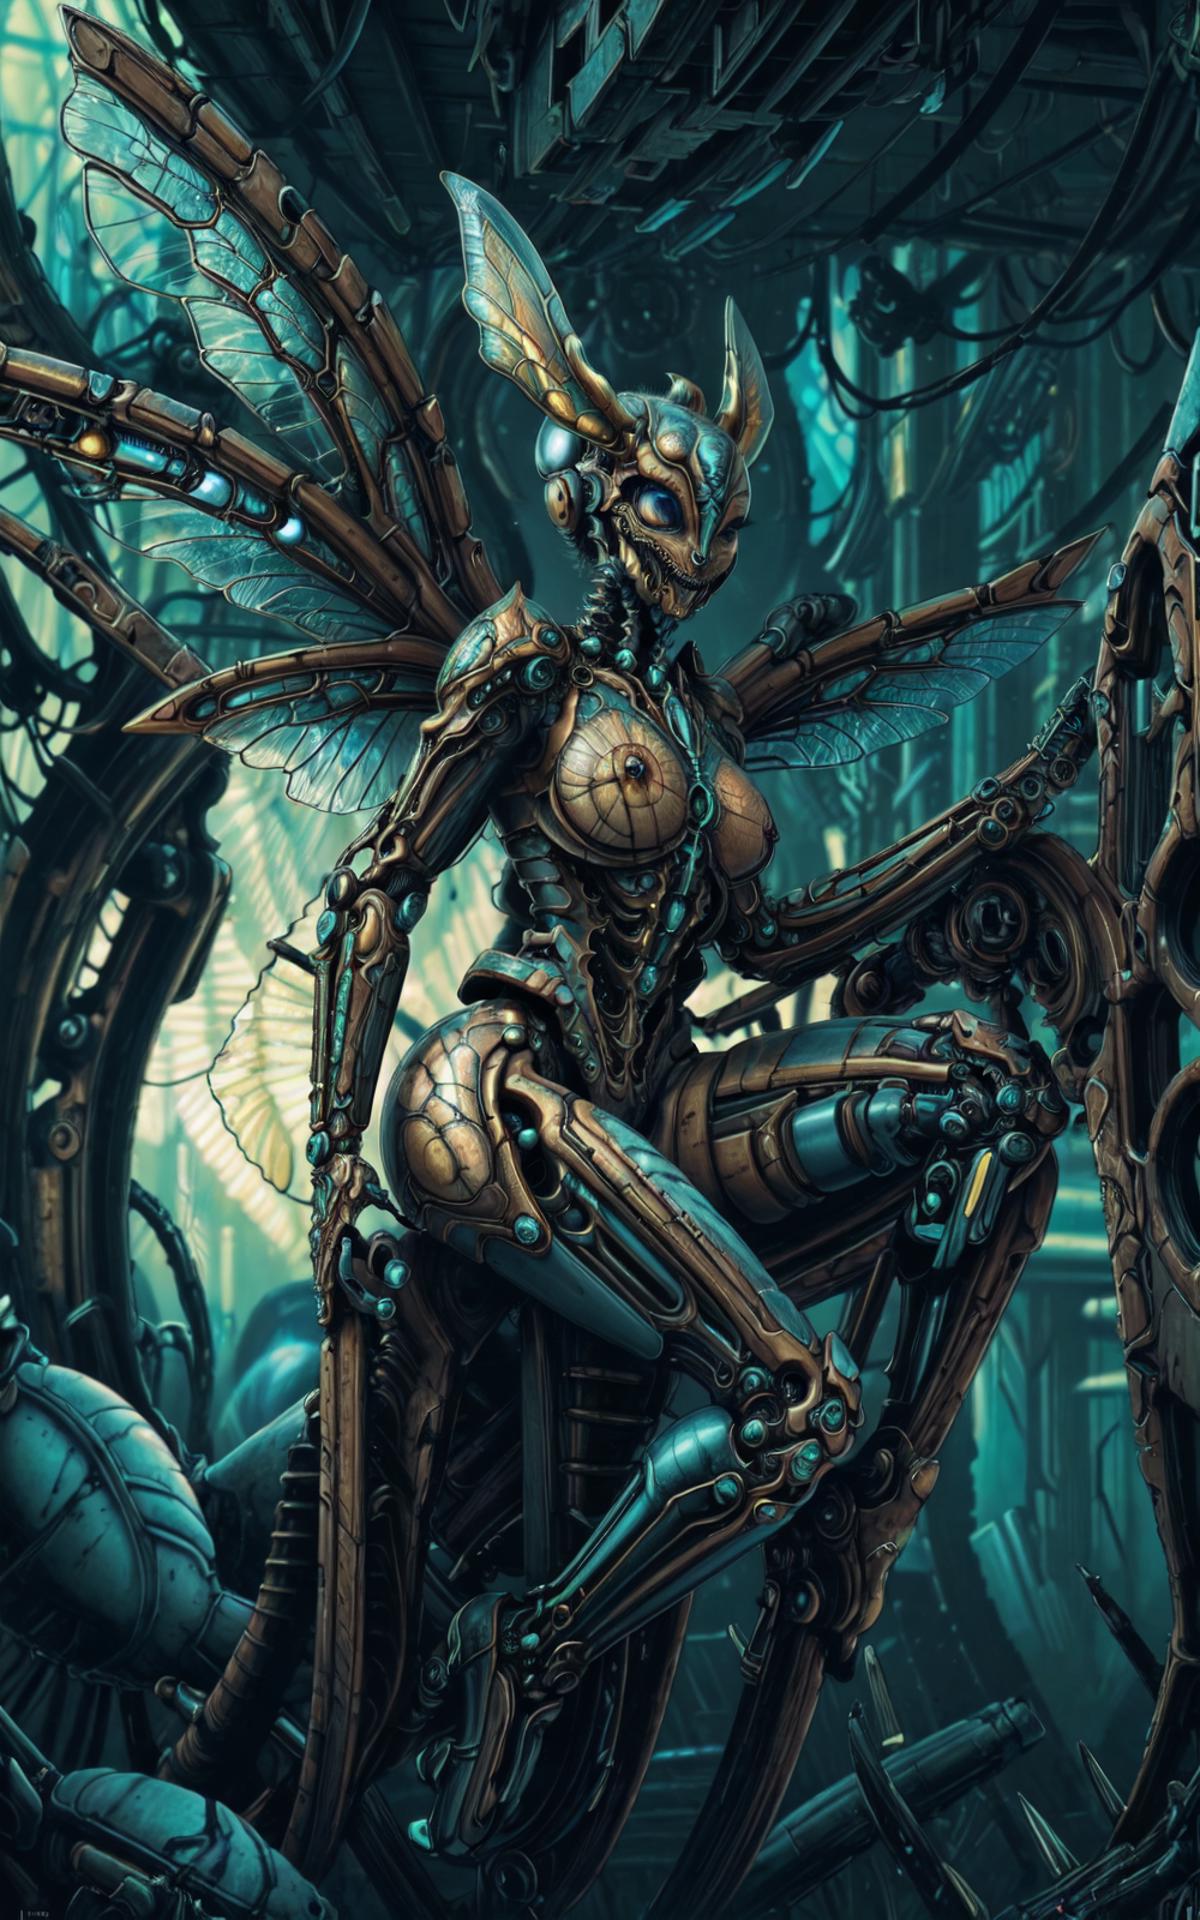 A Robot Woman With Wings Sitting Inside a Machine.